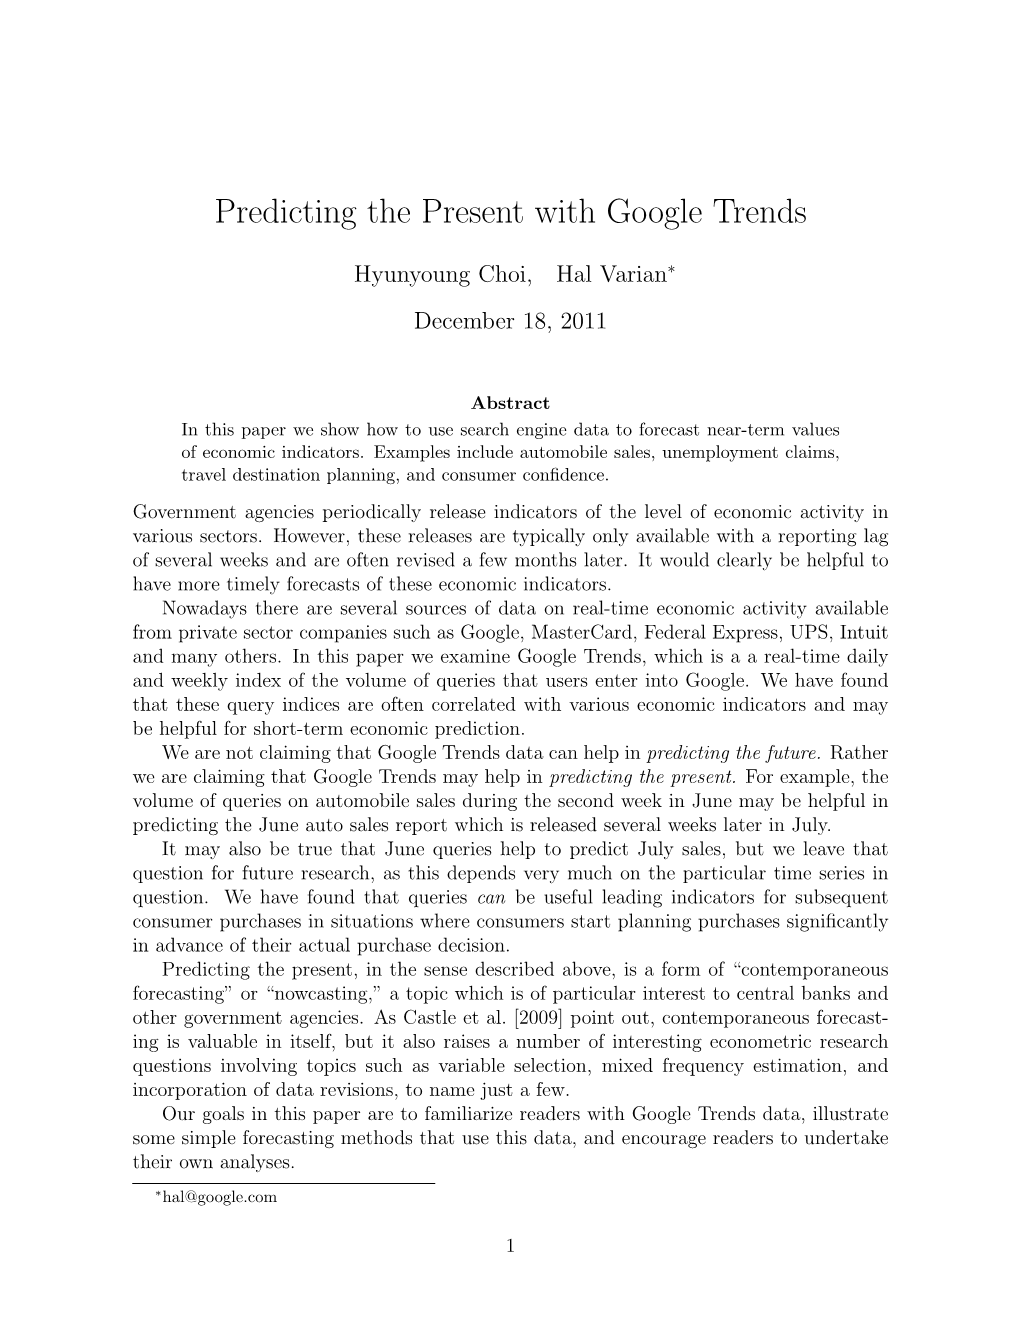 Predicting the Present with Google Trends